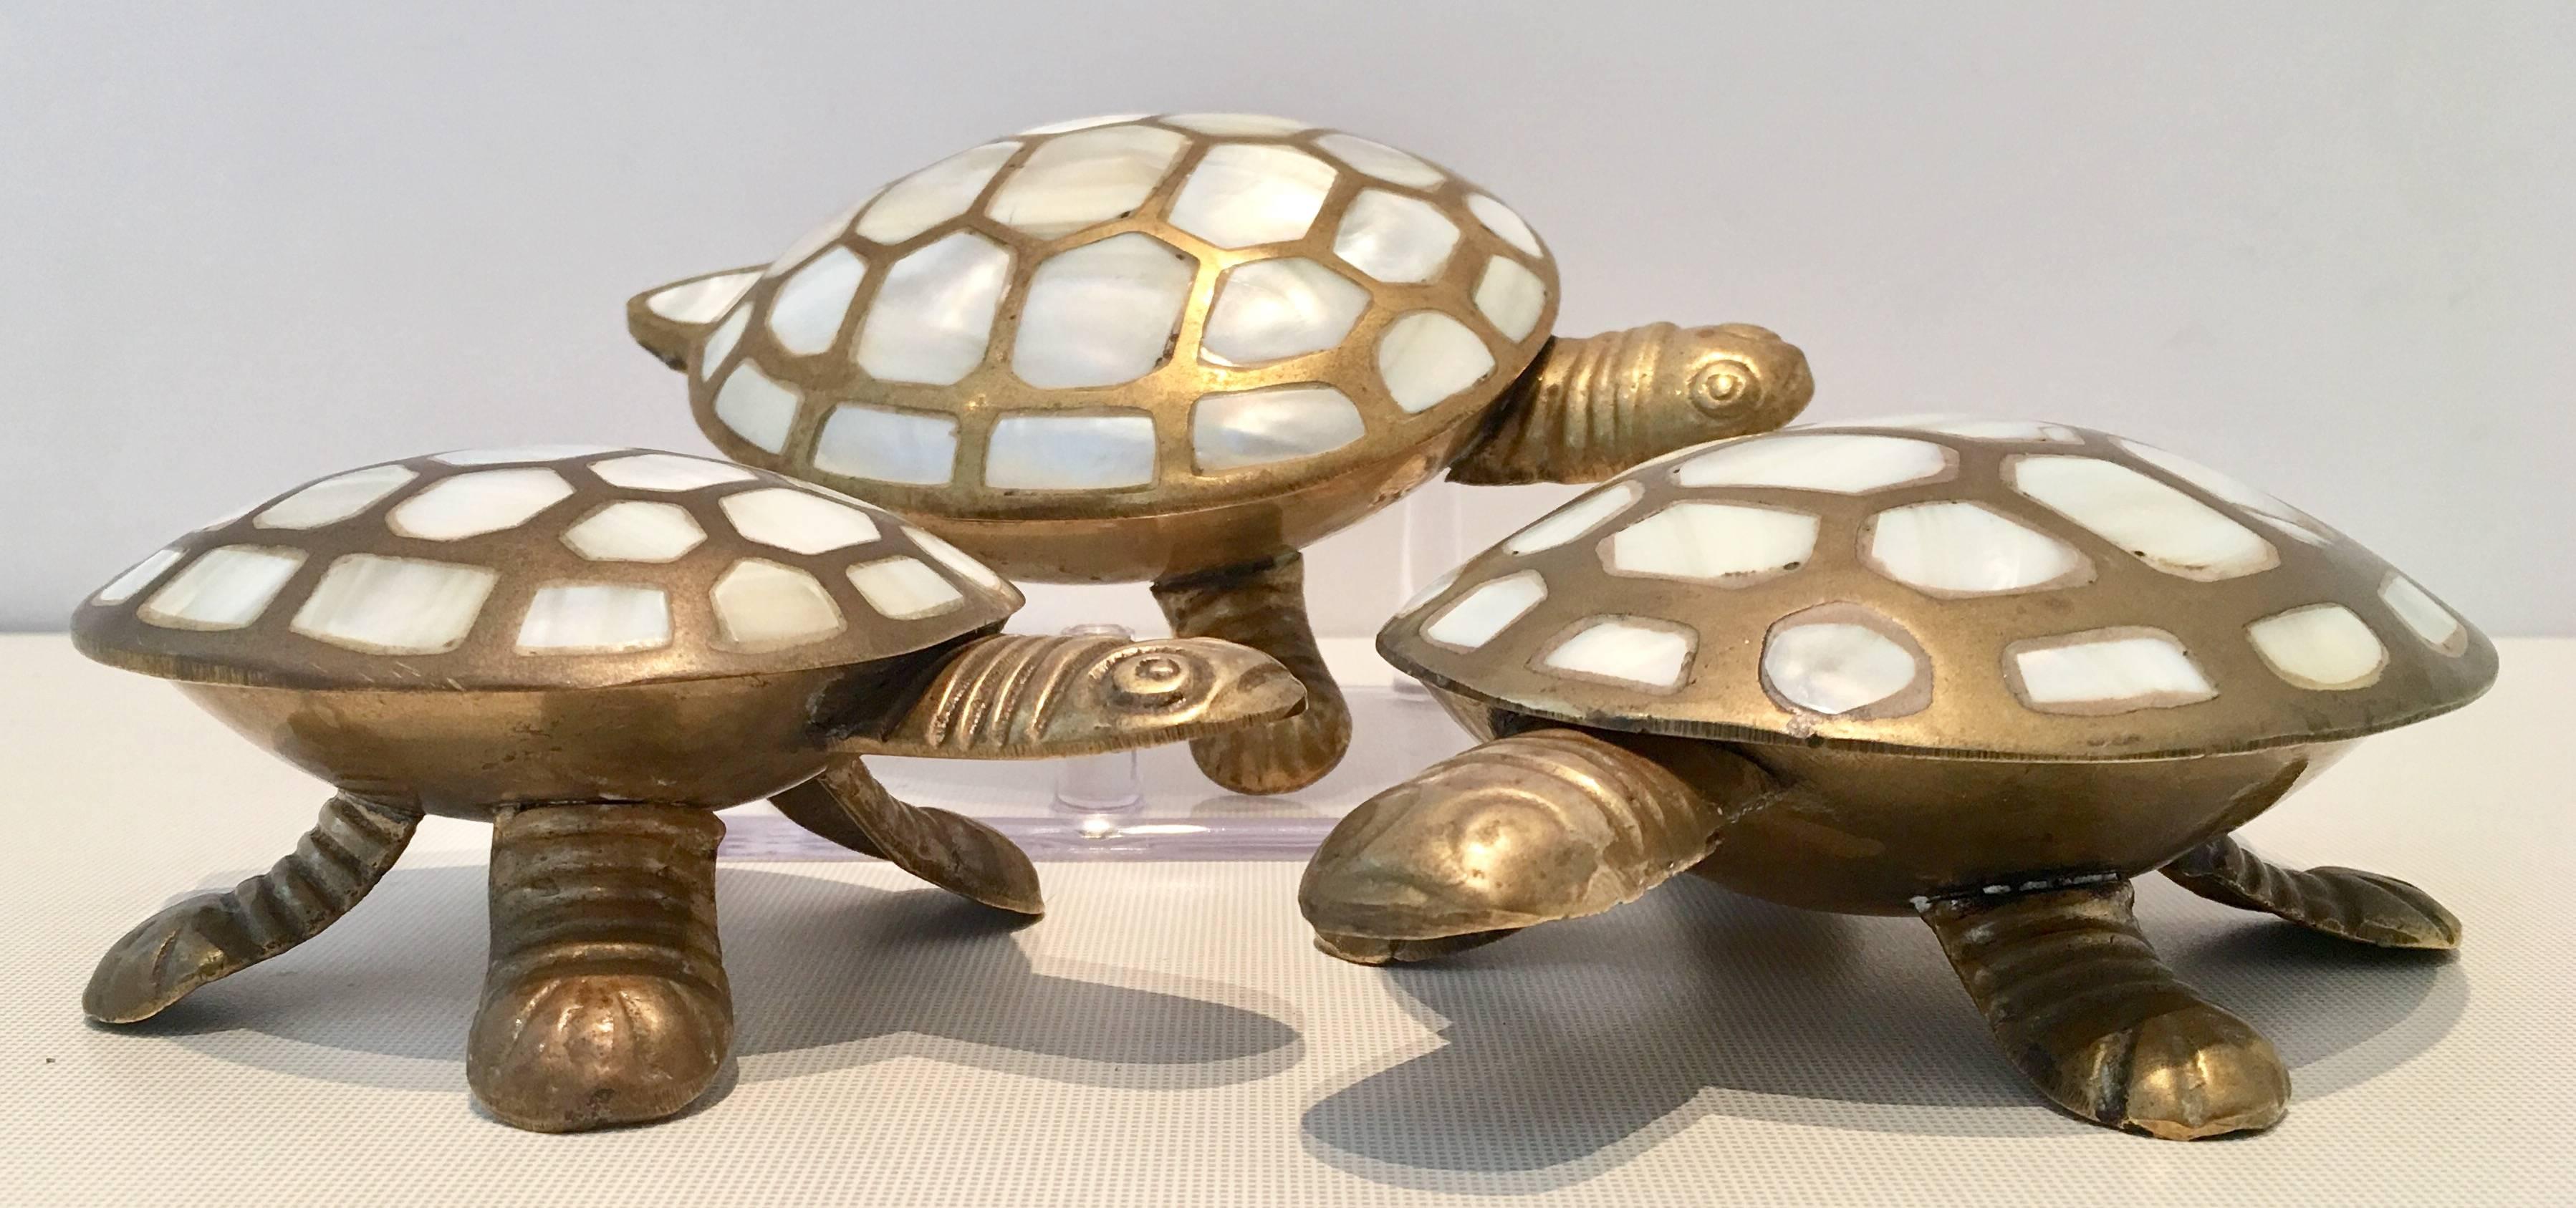 Adorable and rare set of three hinged turtle boxes made of solid brass and mother of pearl inlay. Then medium sized turtle measures, 1.5